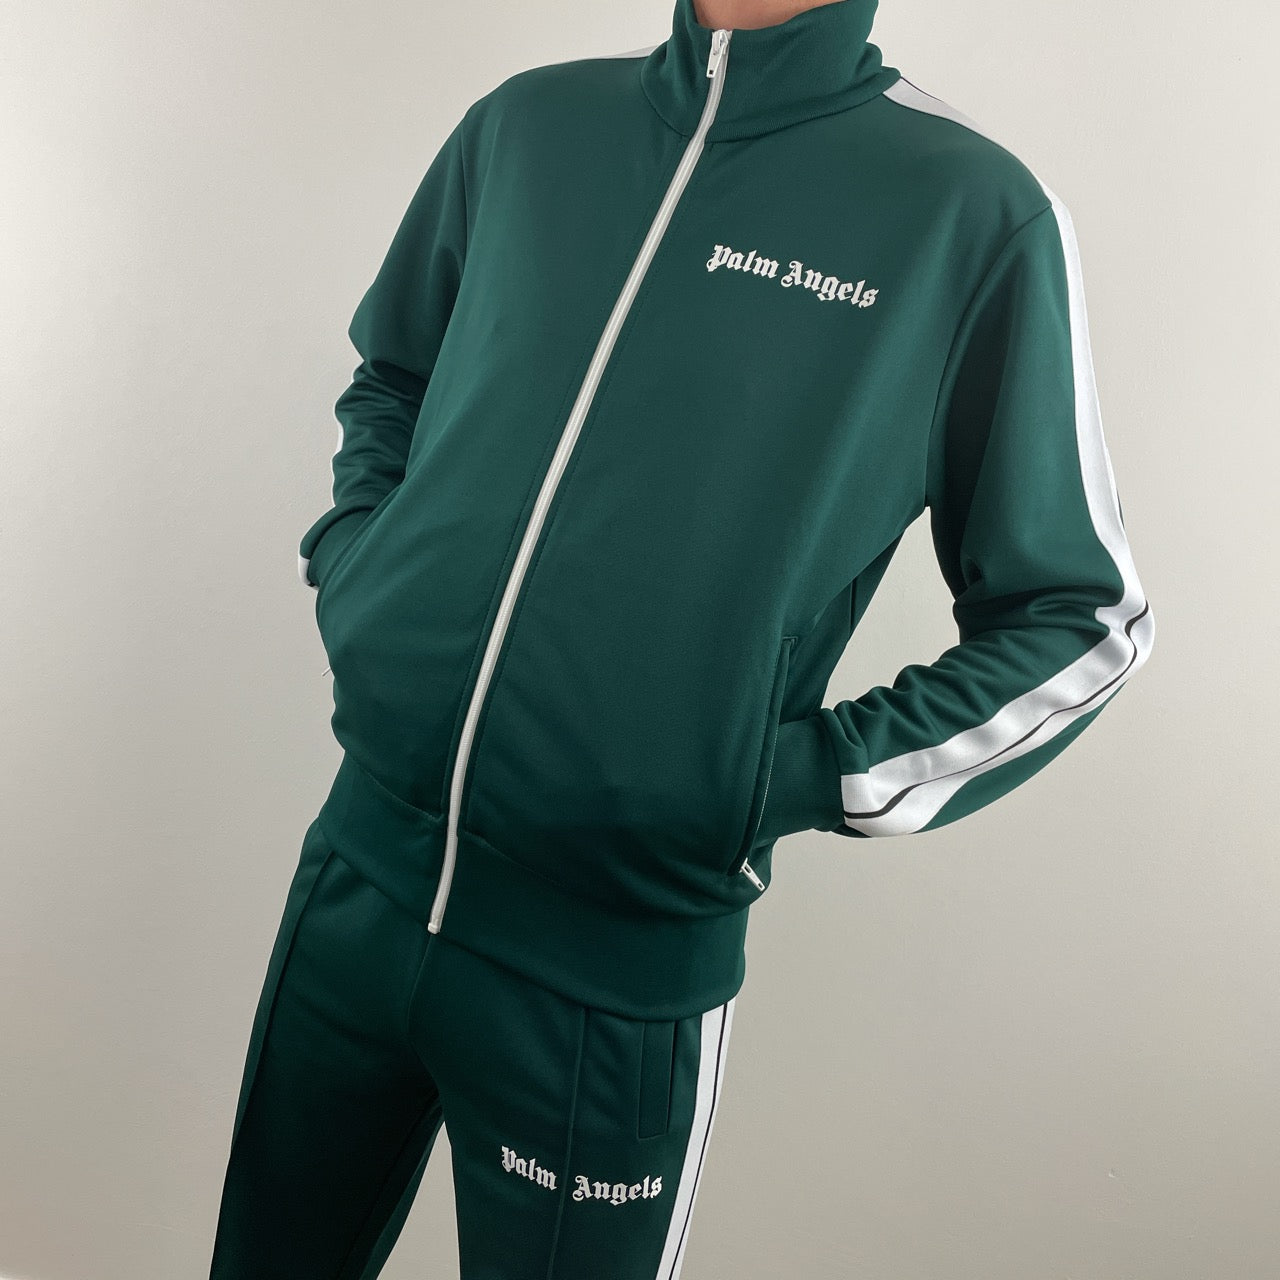 PALM ANGELS TRACKSUIT SWEATPANT BOTTOMS - GREEN